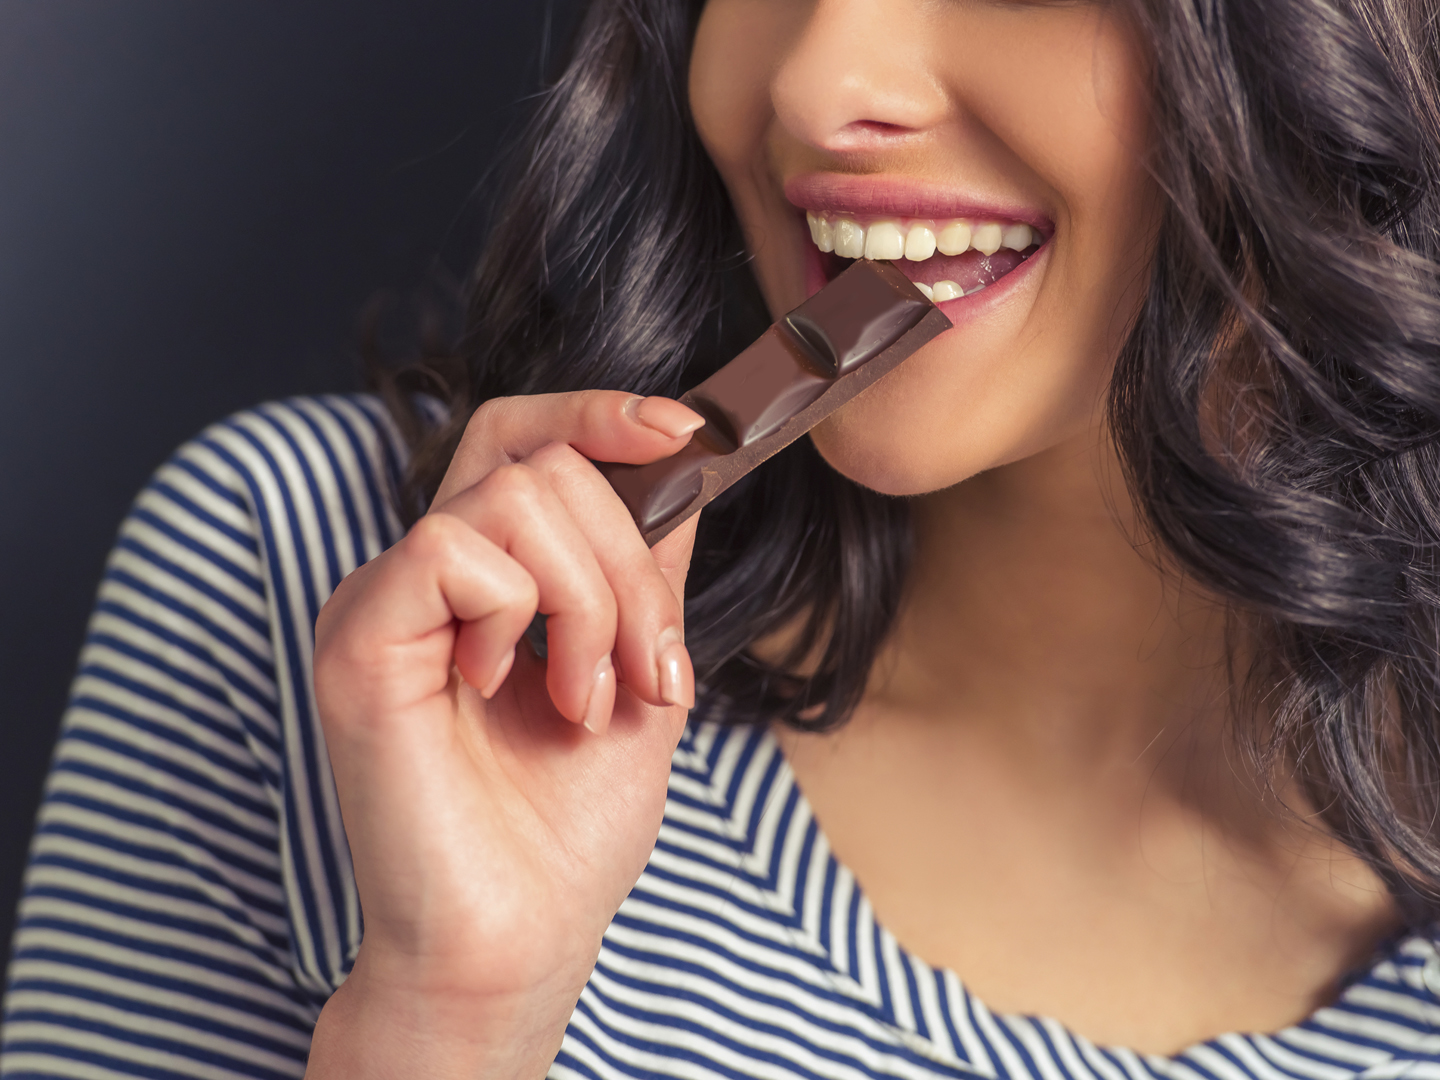 Cropped image of attractive girl eating chocolate and smiling, against dark background